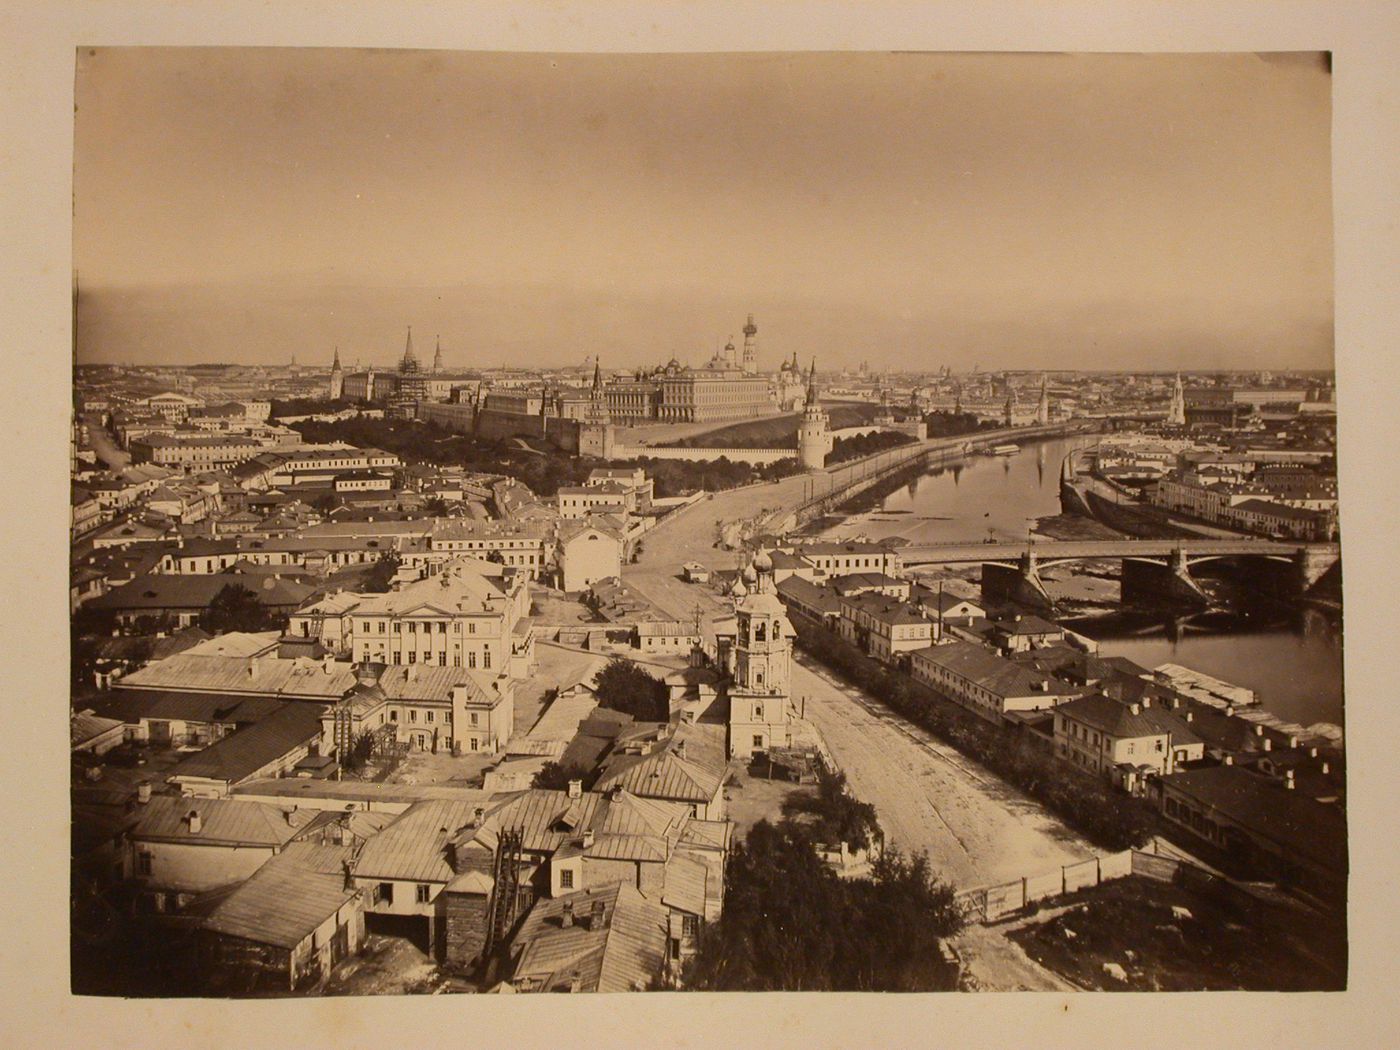 View of Moscow with the Kremlin in the background